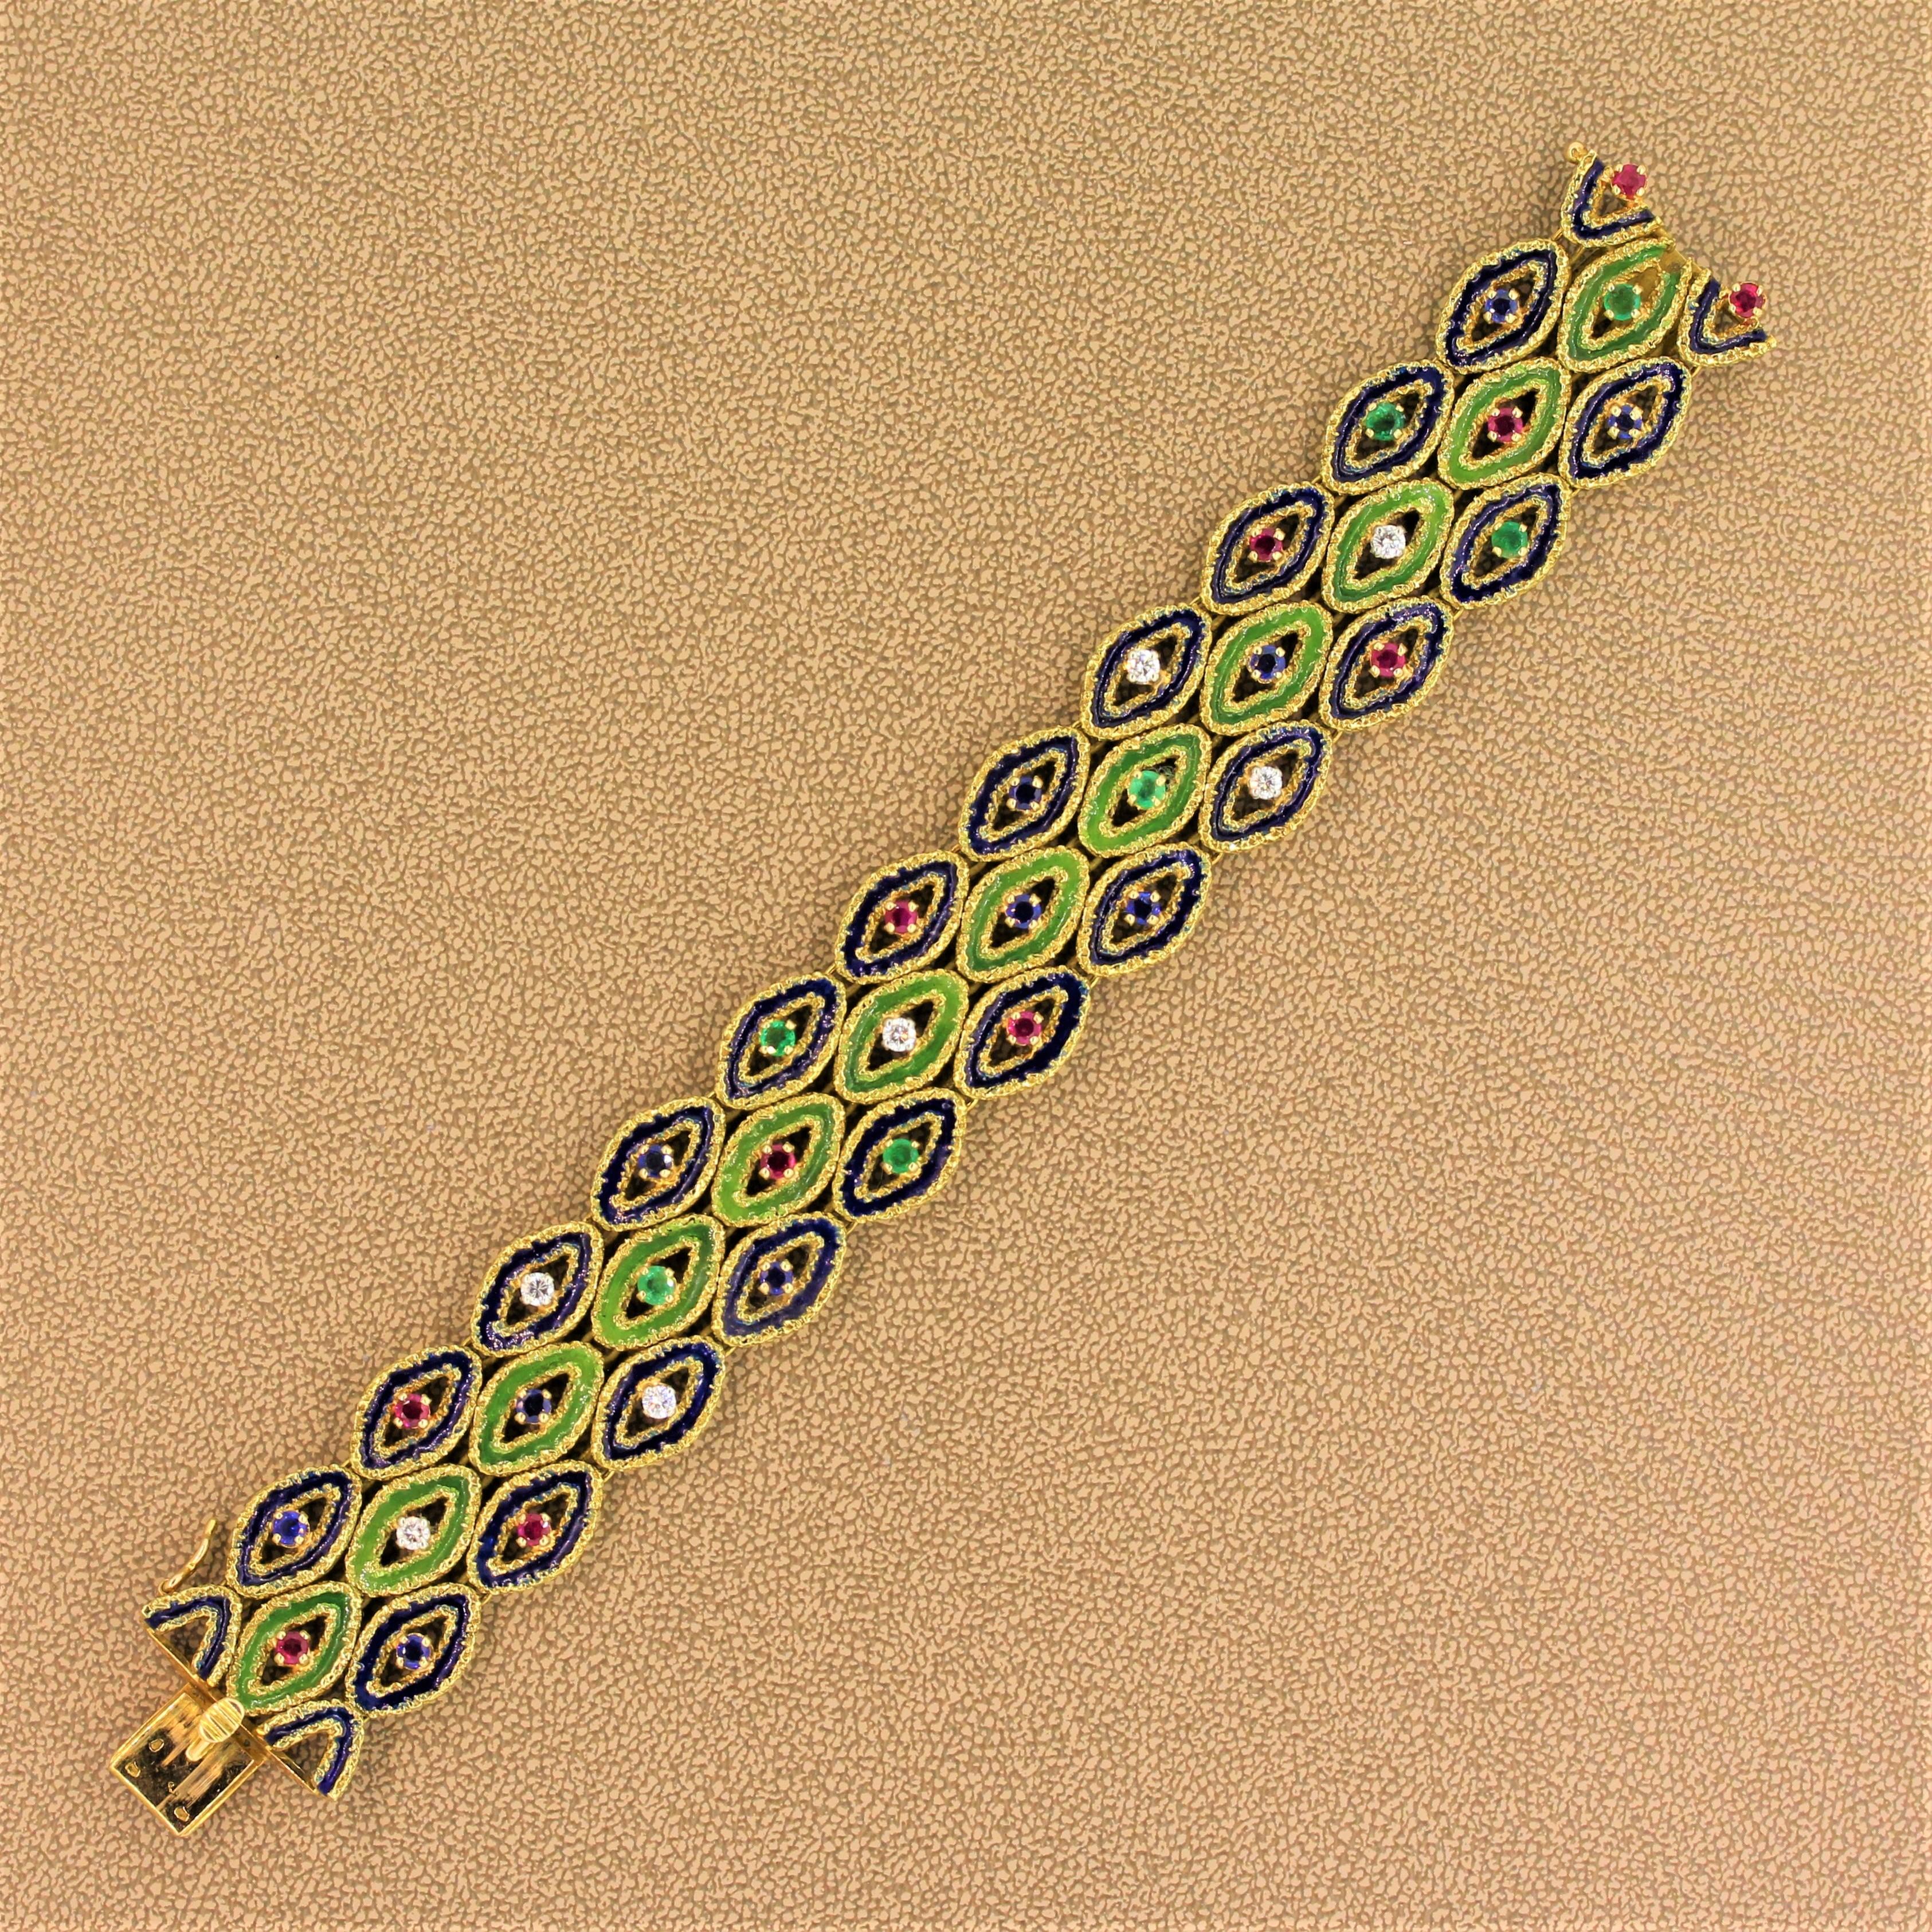 A beautiful French bracelet featuring fine sapphire, ruby and emeralds as well as diamonds in an 18K yellow gold setting. Each precious stone is prong set in the center of rows of hand painted blue and green enamel with a textured filigreed gold